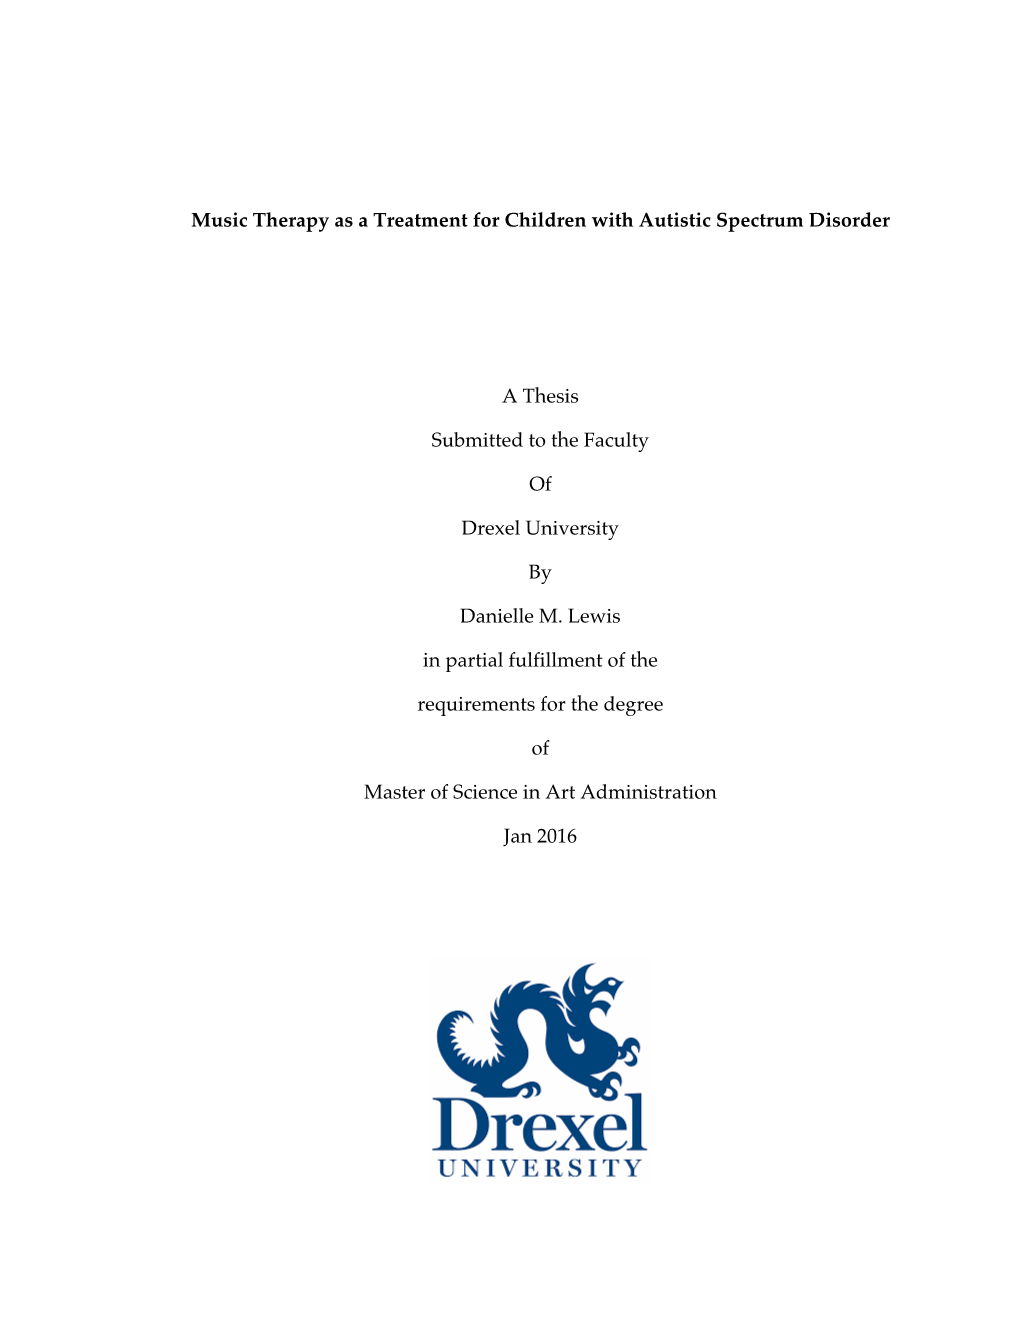 Music Therapy As a Treatment for Children with Autistic Spectrum Disorder